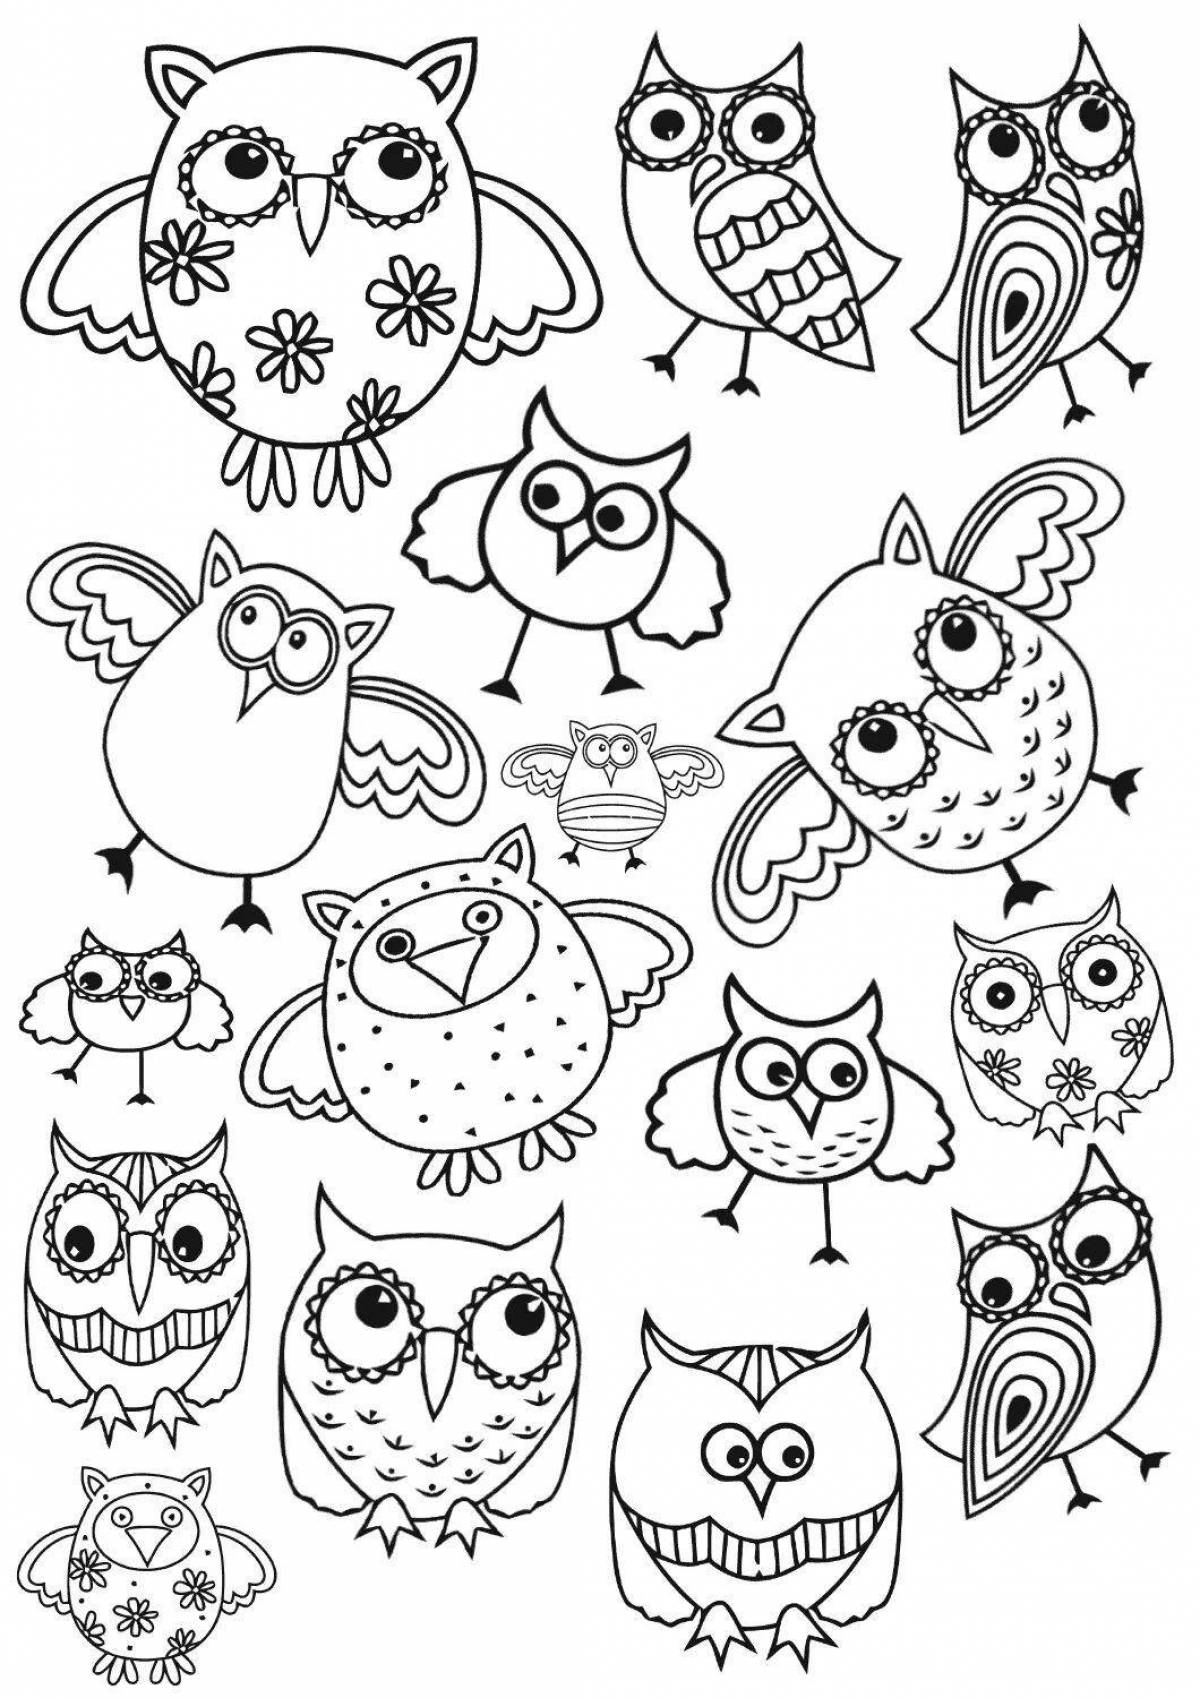 Adorable sticker coloring pages